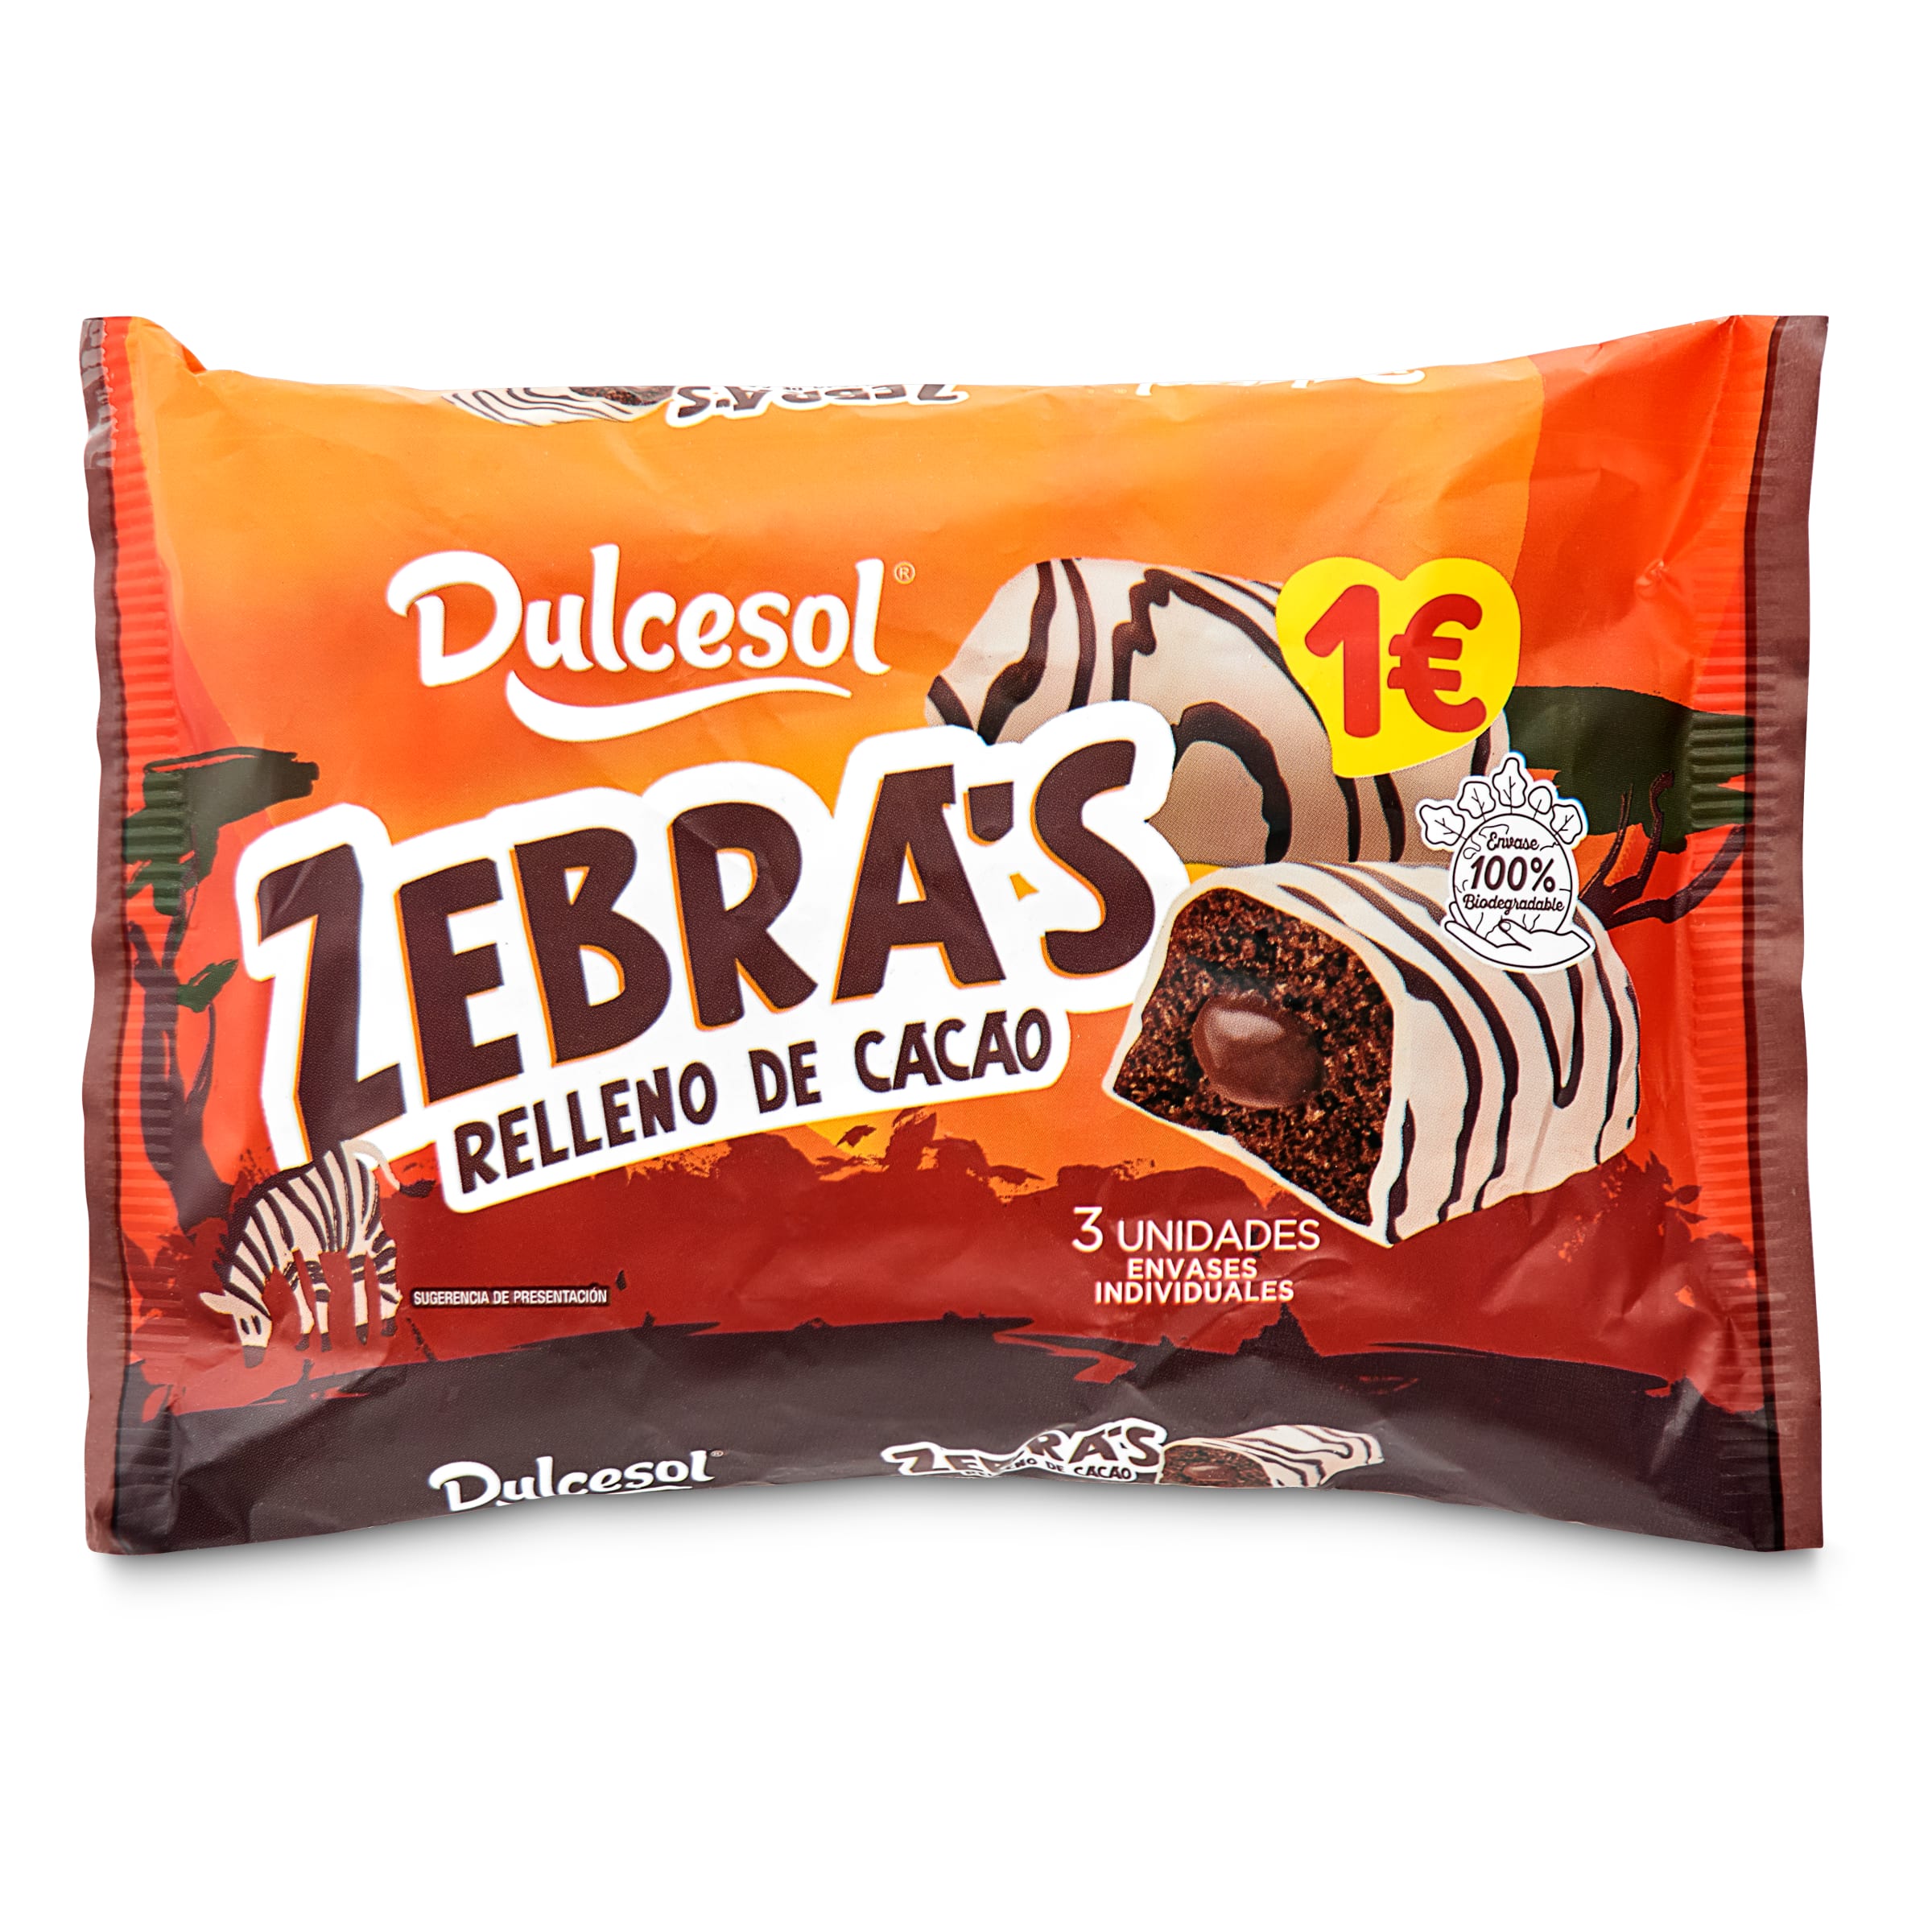 Dulcesol Zebra's Chocolate Filled Cakes 3 Pack 120g (Sep 23) RRP 1 CLEARANCE XL 89p or 2 for 1.50